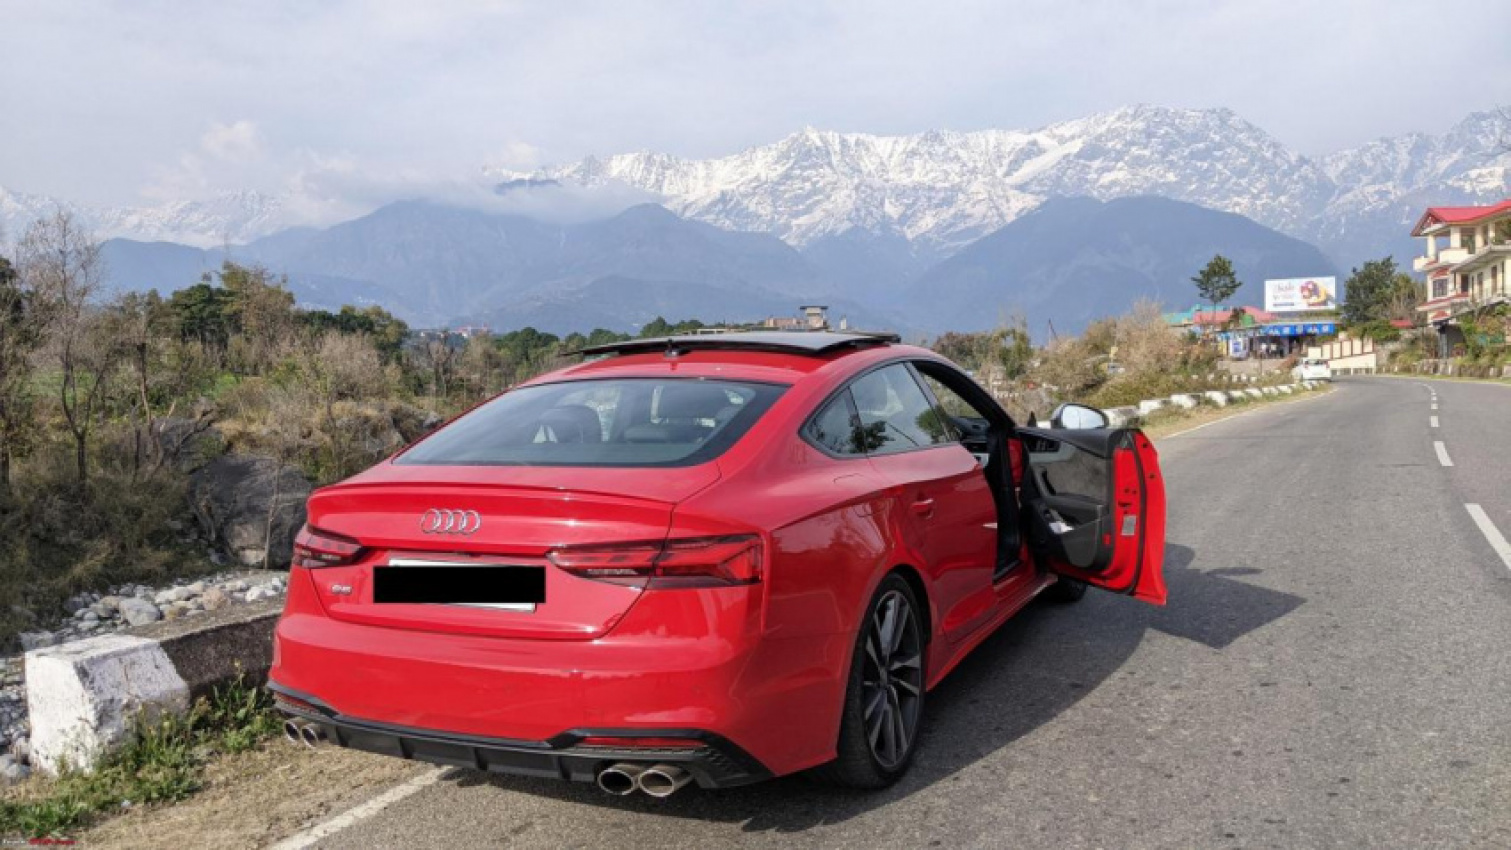 audi, autos, cars, audi s5, indian, member content, road trip, took my audi s5 on a 7-day long road trip to the mountains